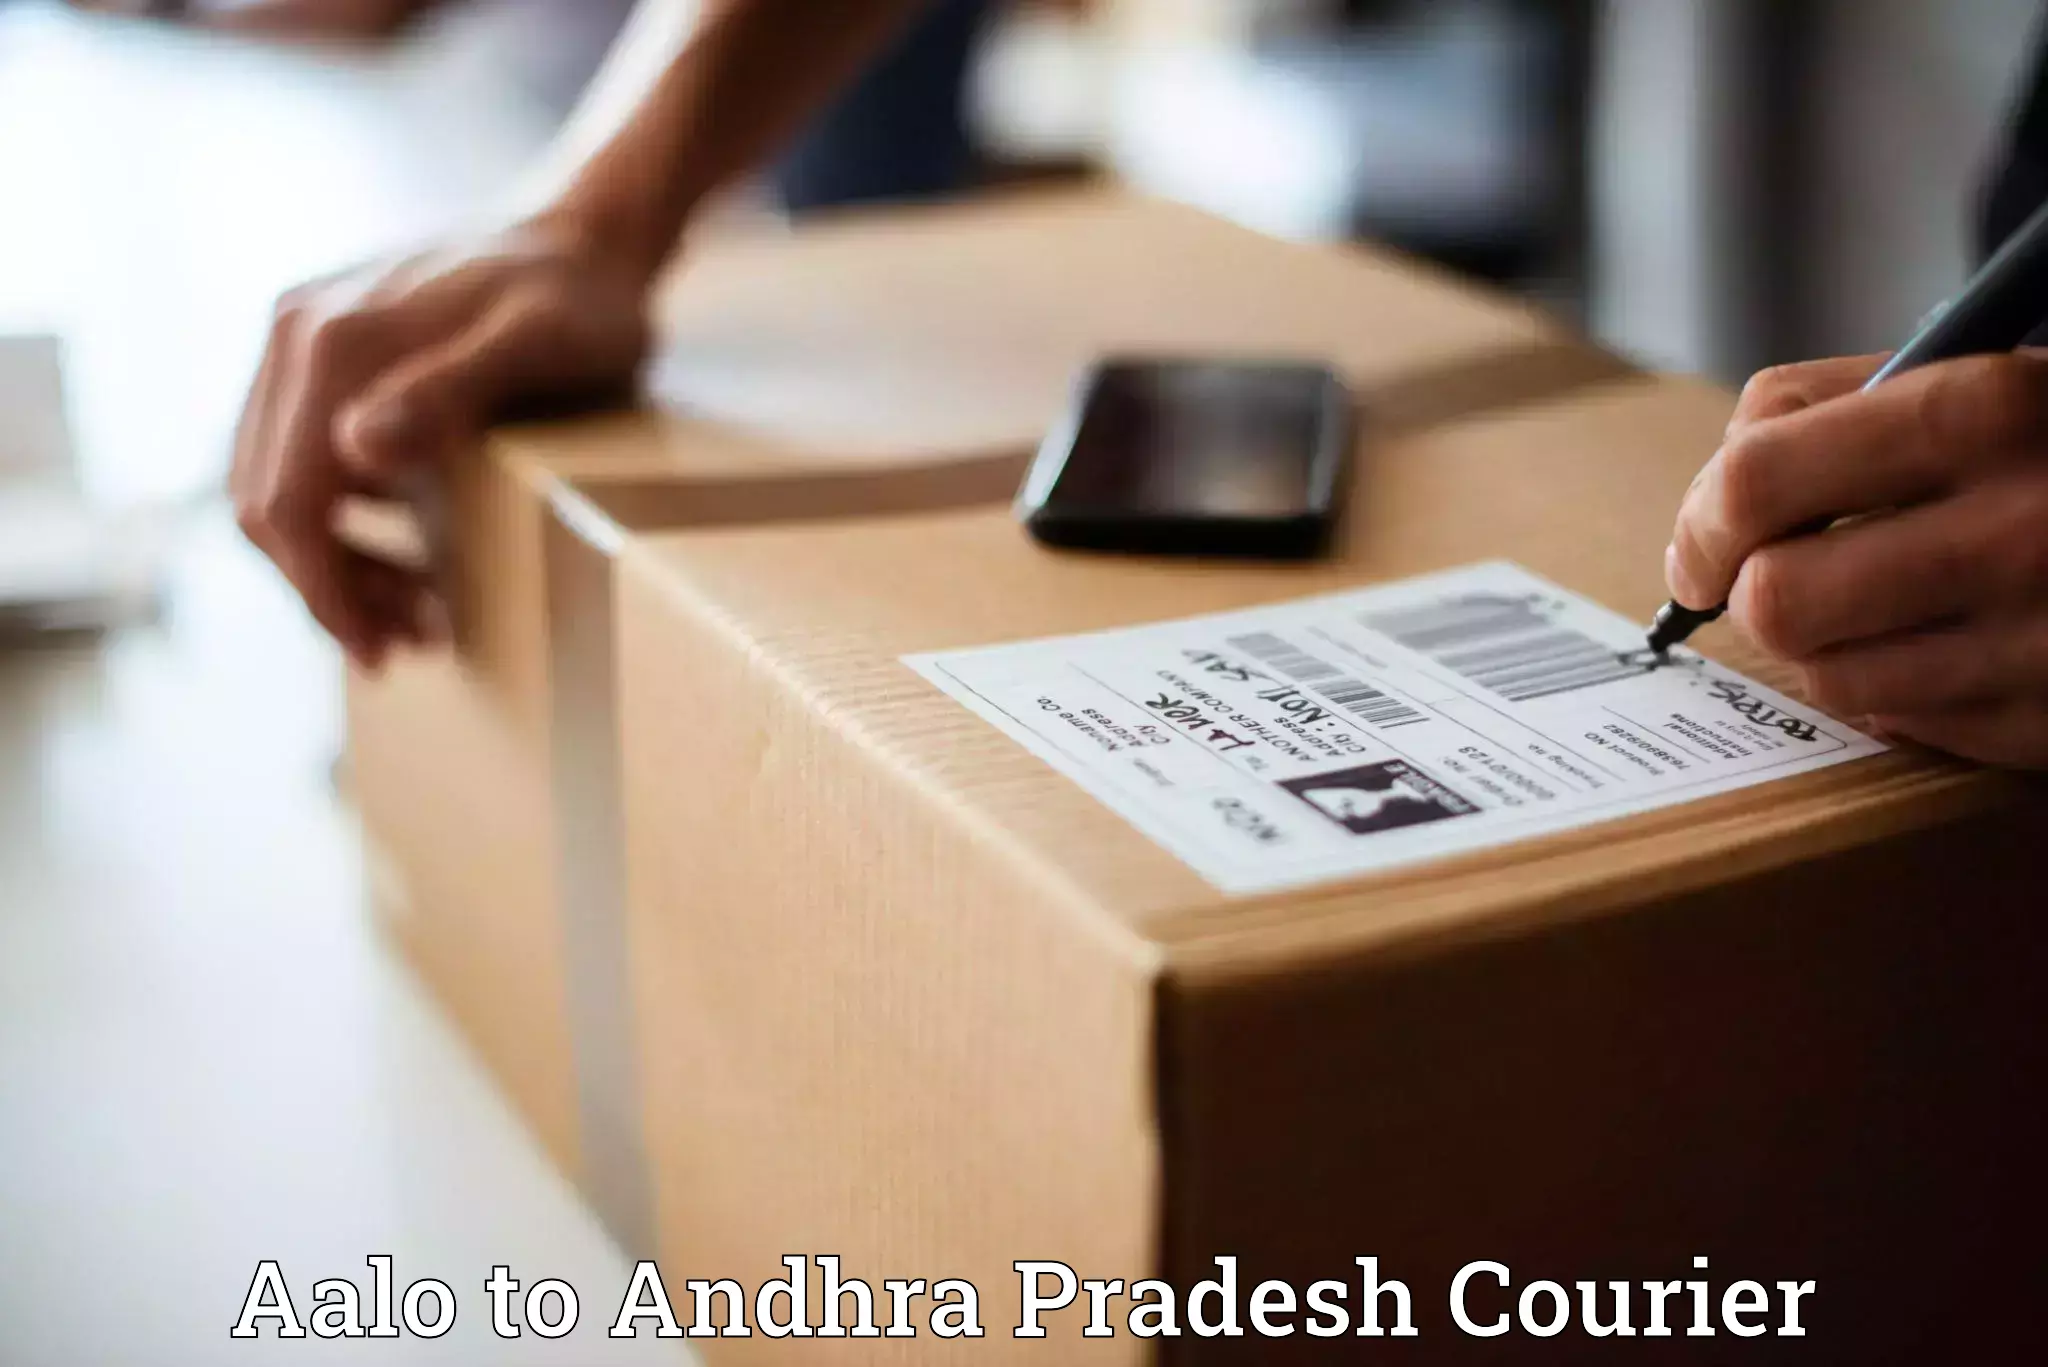 Express delivery capabilities Aalo to Nellore